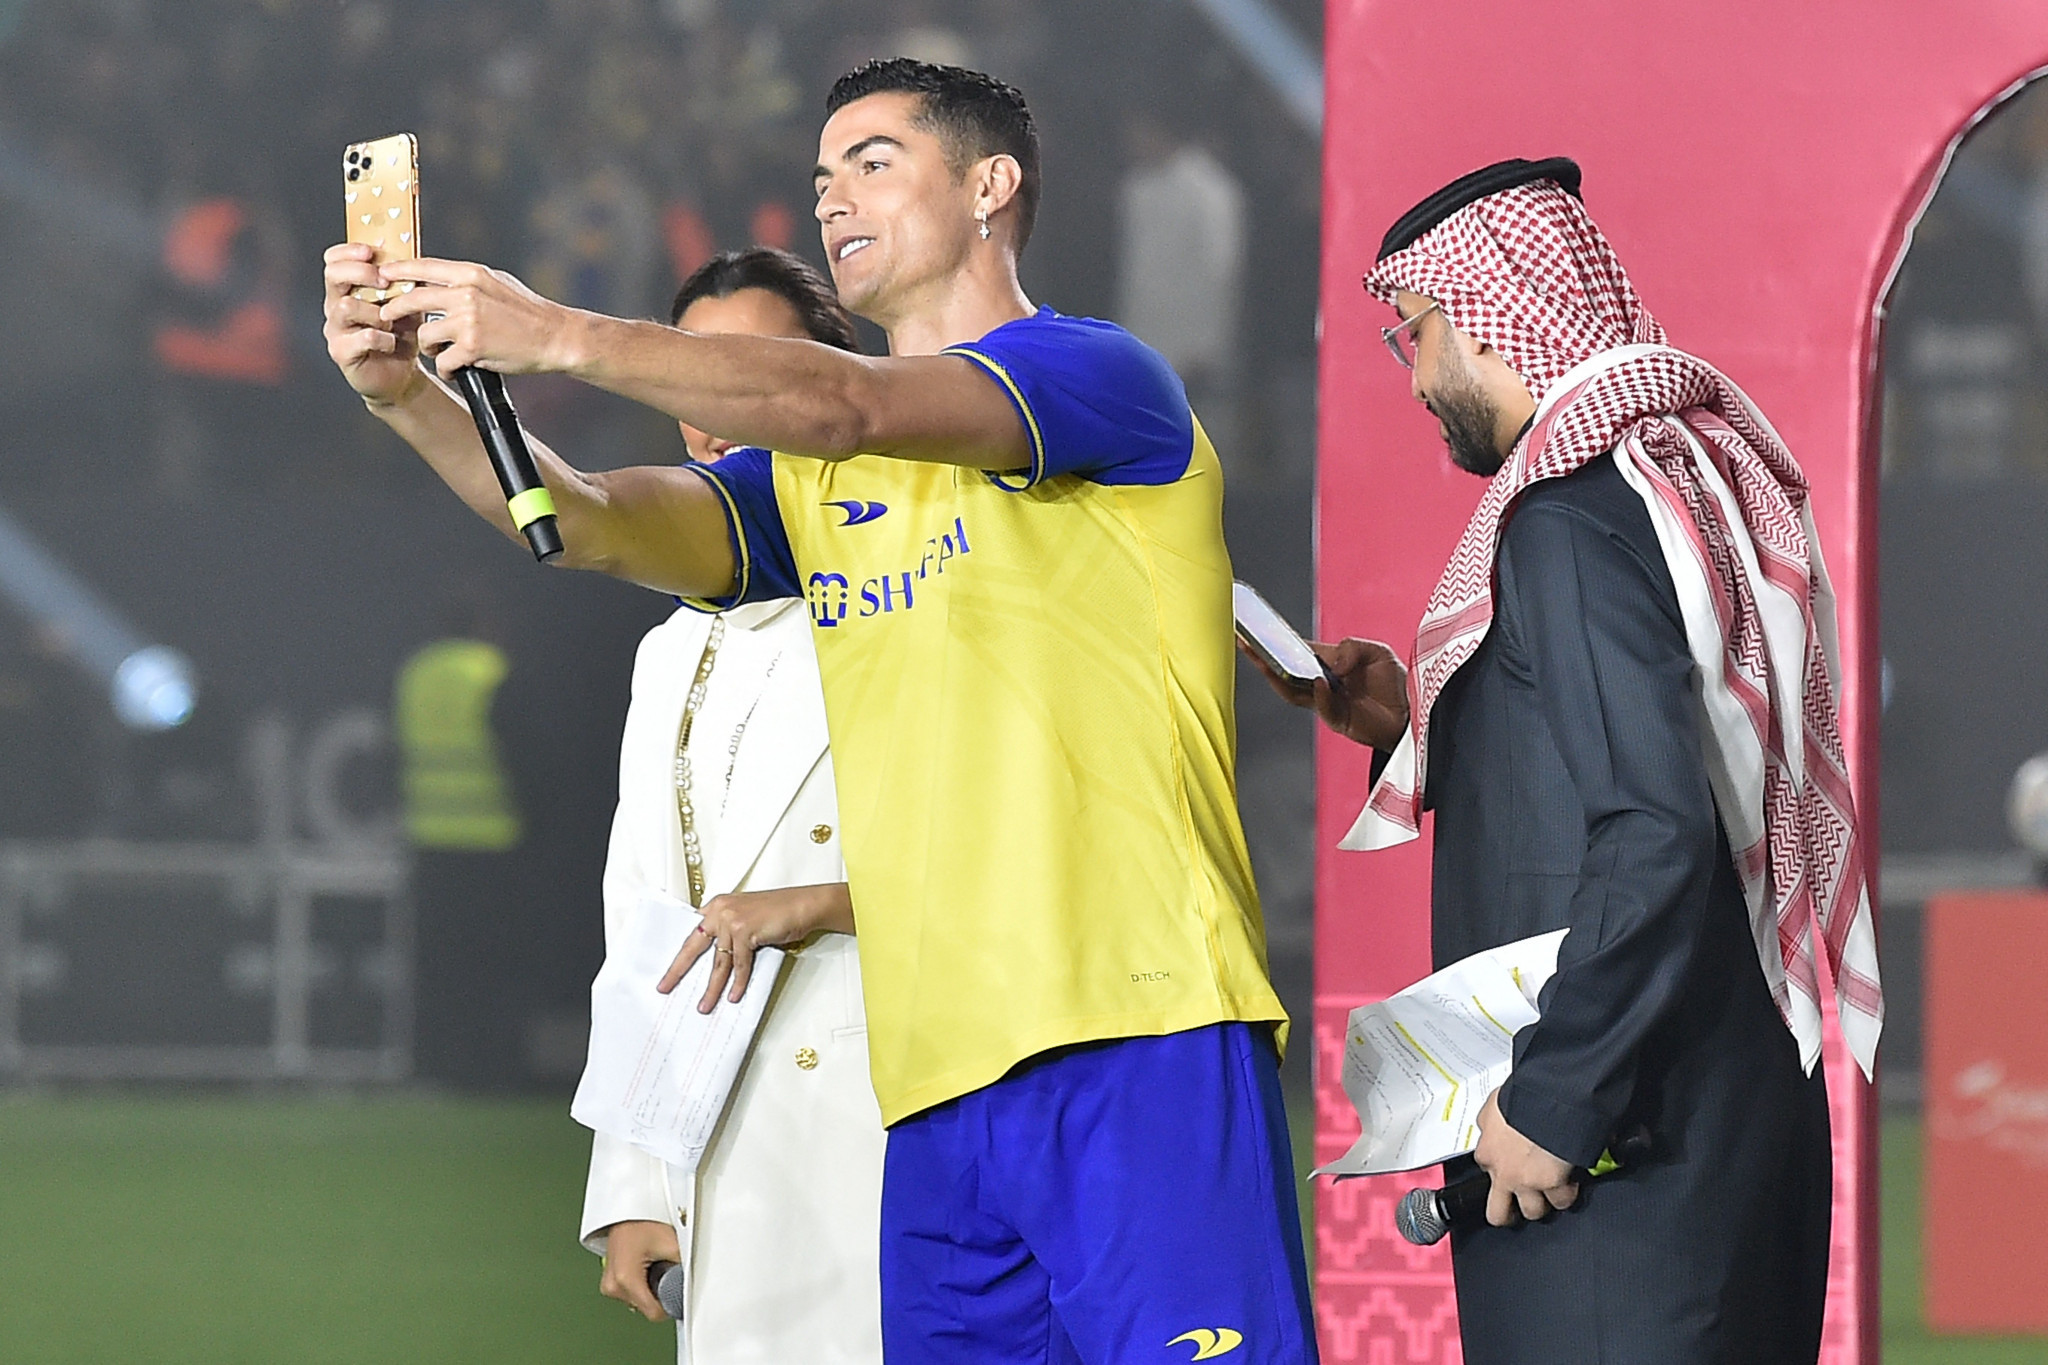 Ronaldo of Arabia has the platform to bring changes - but will he use it?